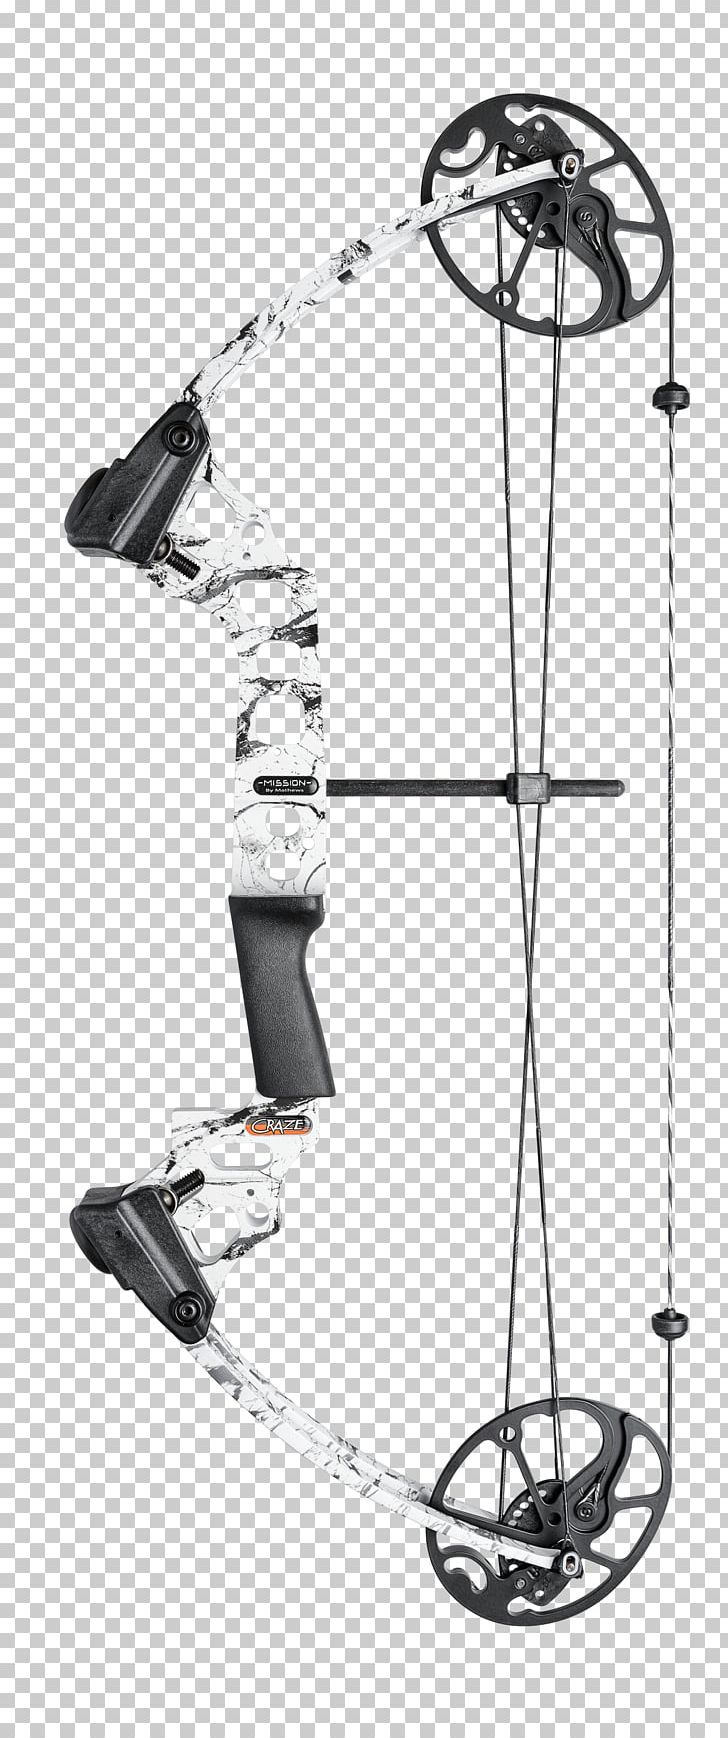 Bow And Arrow Archery Compound Bows Bowhunting PNG, Clipart, Angle, Archery, Black And White, Bow And Arrow, Bowhunting Free PNG Download